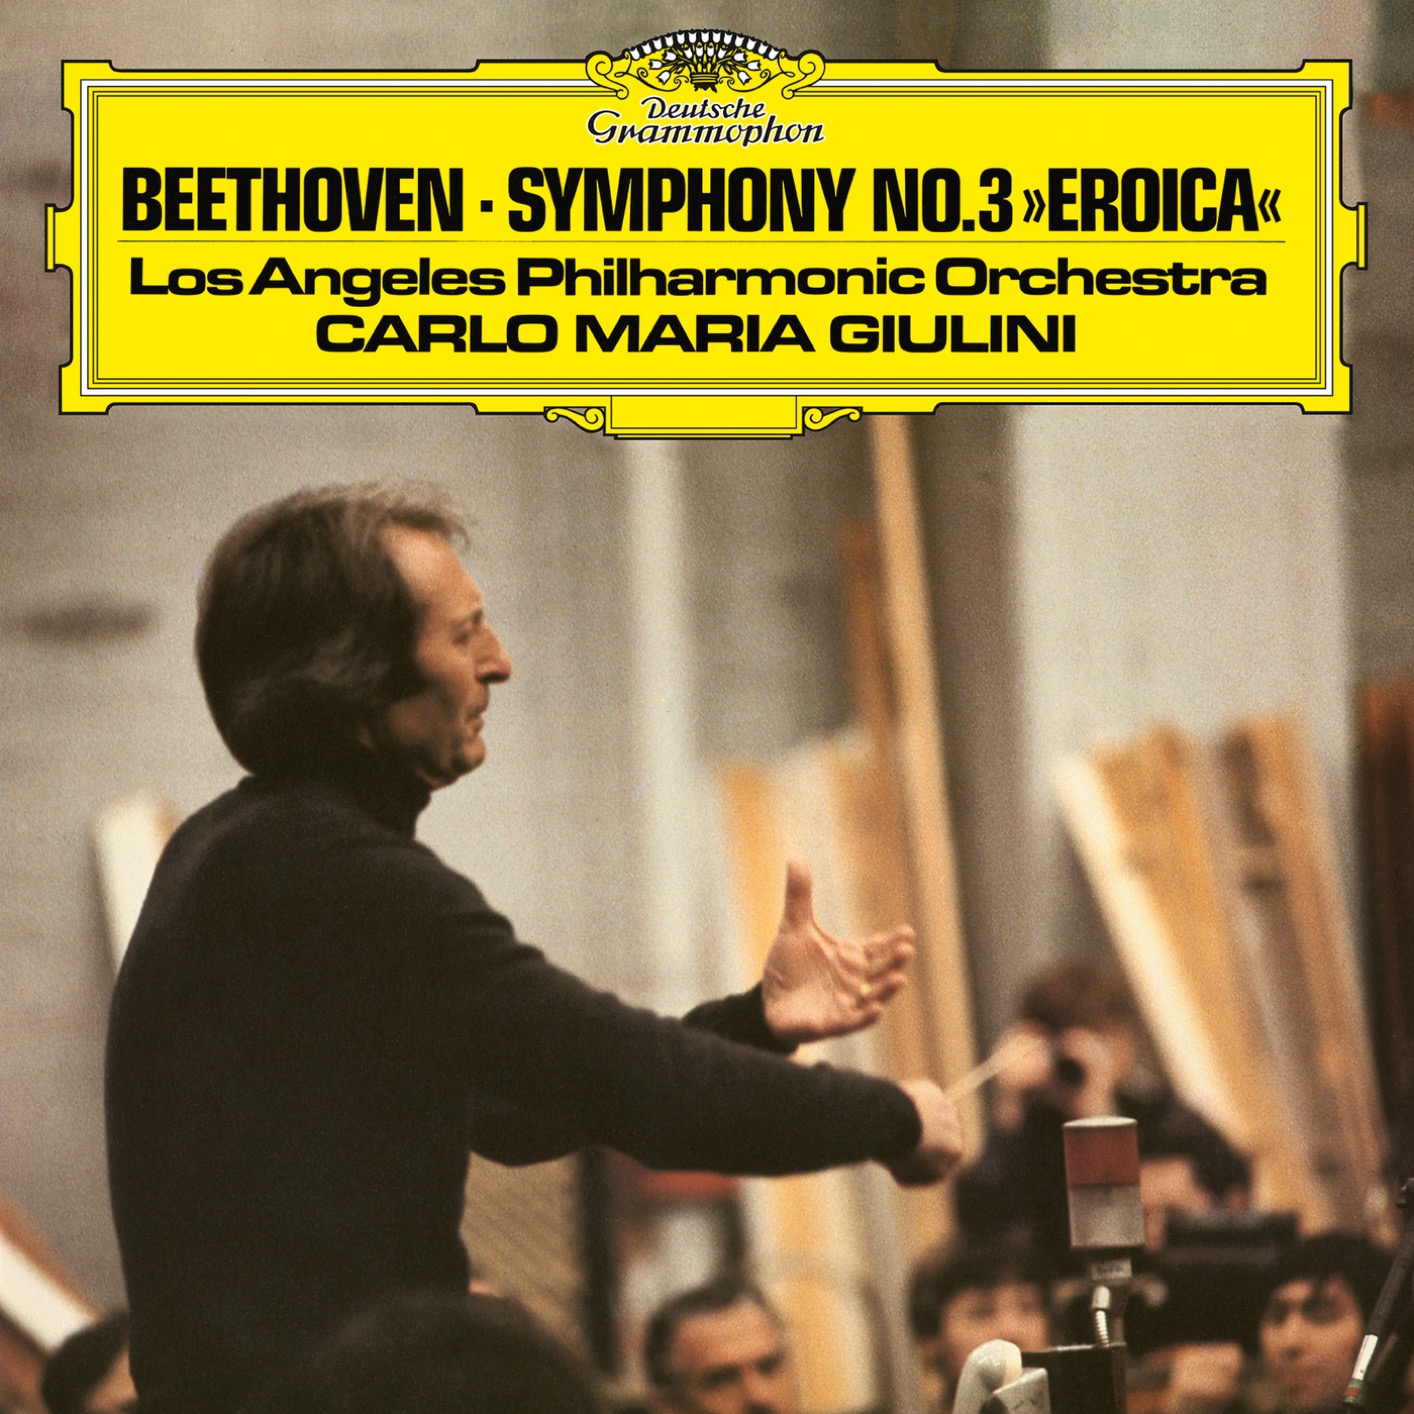 Los Angeles Philharmonic Orchestra & Carlo Maria Giulini - Beethoven: Symphony No. 3 in E Flat, Op. 55 (Remastered) (2019) [FLAC 24bit/96kHz]